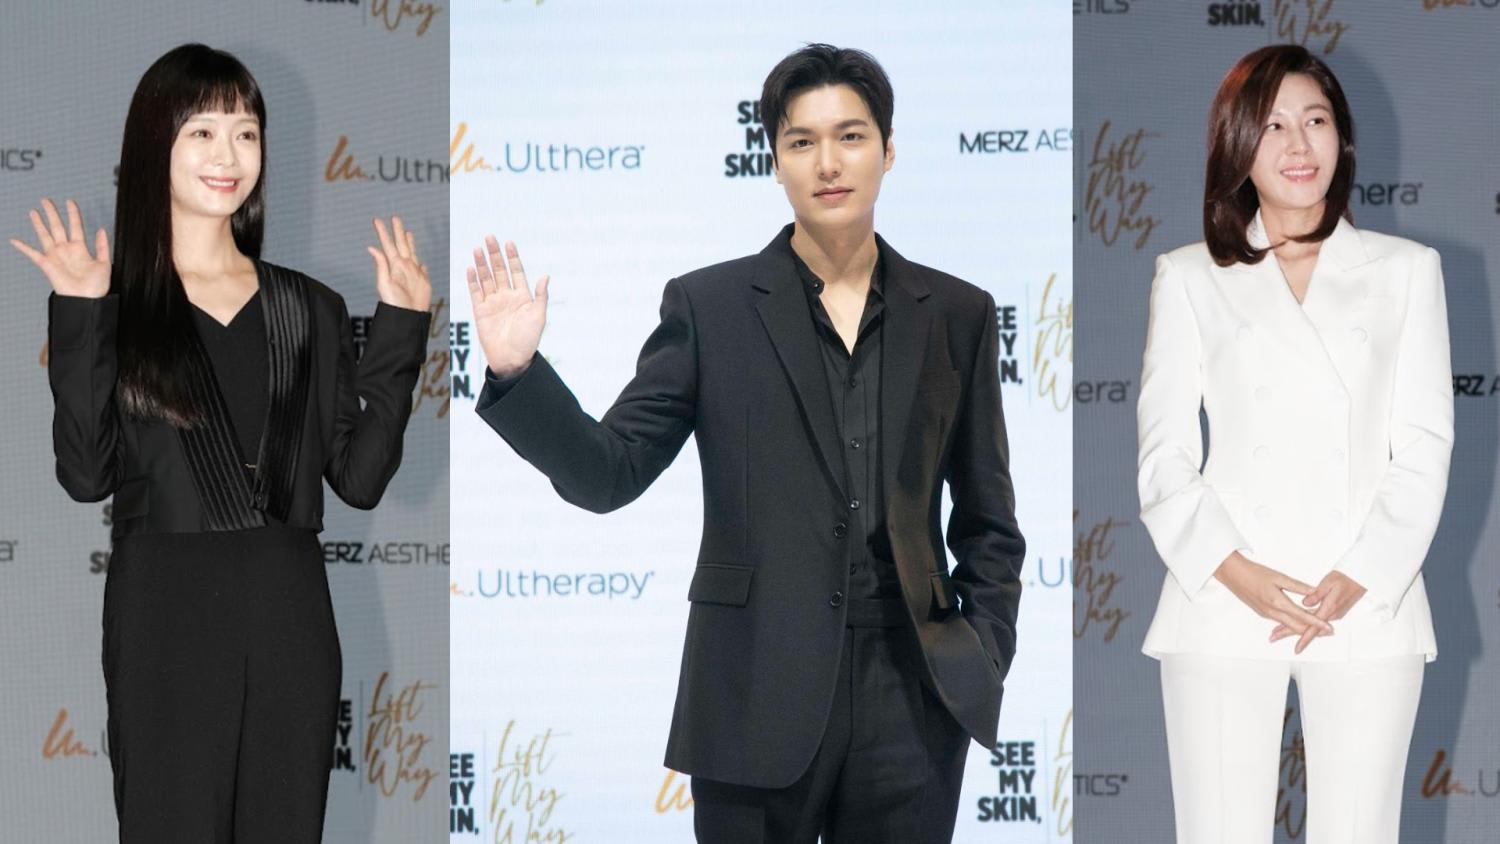 We Meet Korean Stars Lee Min Ho, Jeon So Min And Kim Ha Neul In Seoul To Find Out How They Always Look So Good